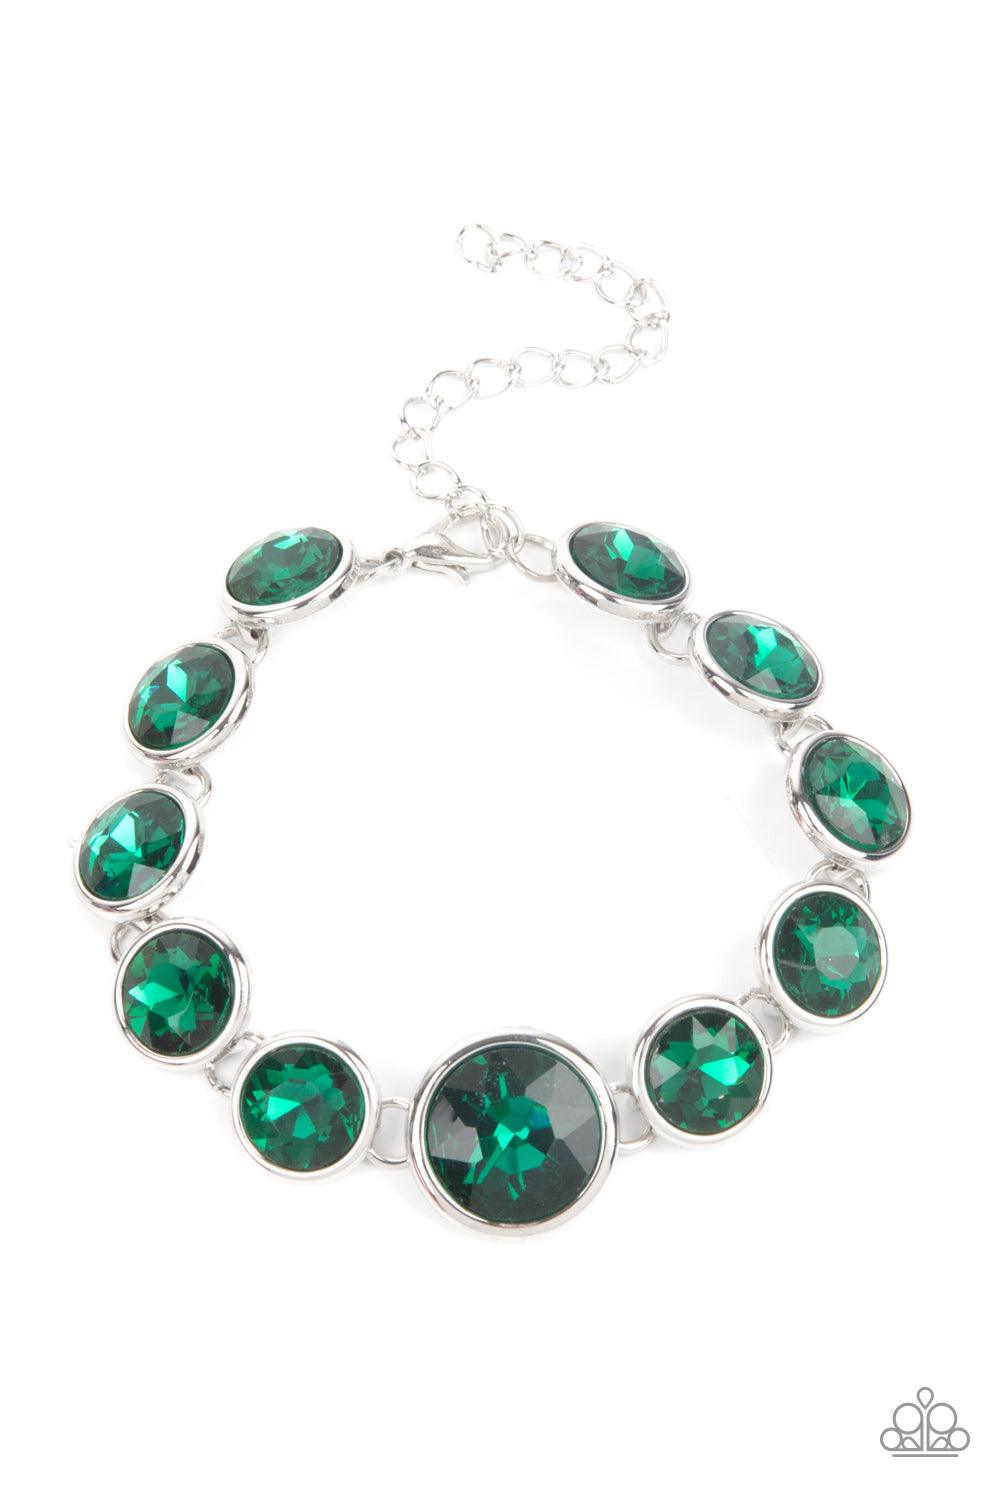 Paparazzi Accessories Lustrous Luminosity - Green Featuring sleek silver fittings, an oversized collection of sparkly green gems delicately link around the wrist. The centermost gem is slightly larger than the rest, adding a glamorous finish. Features an